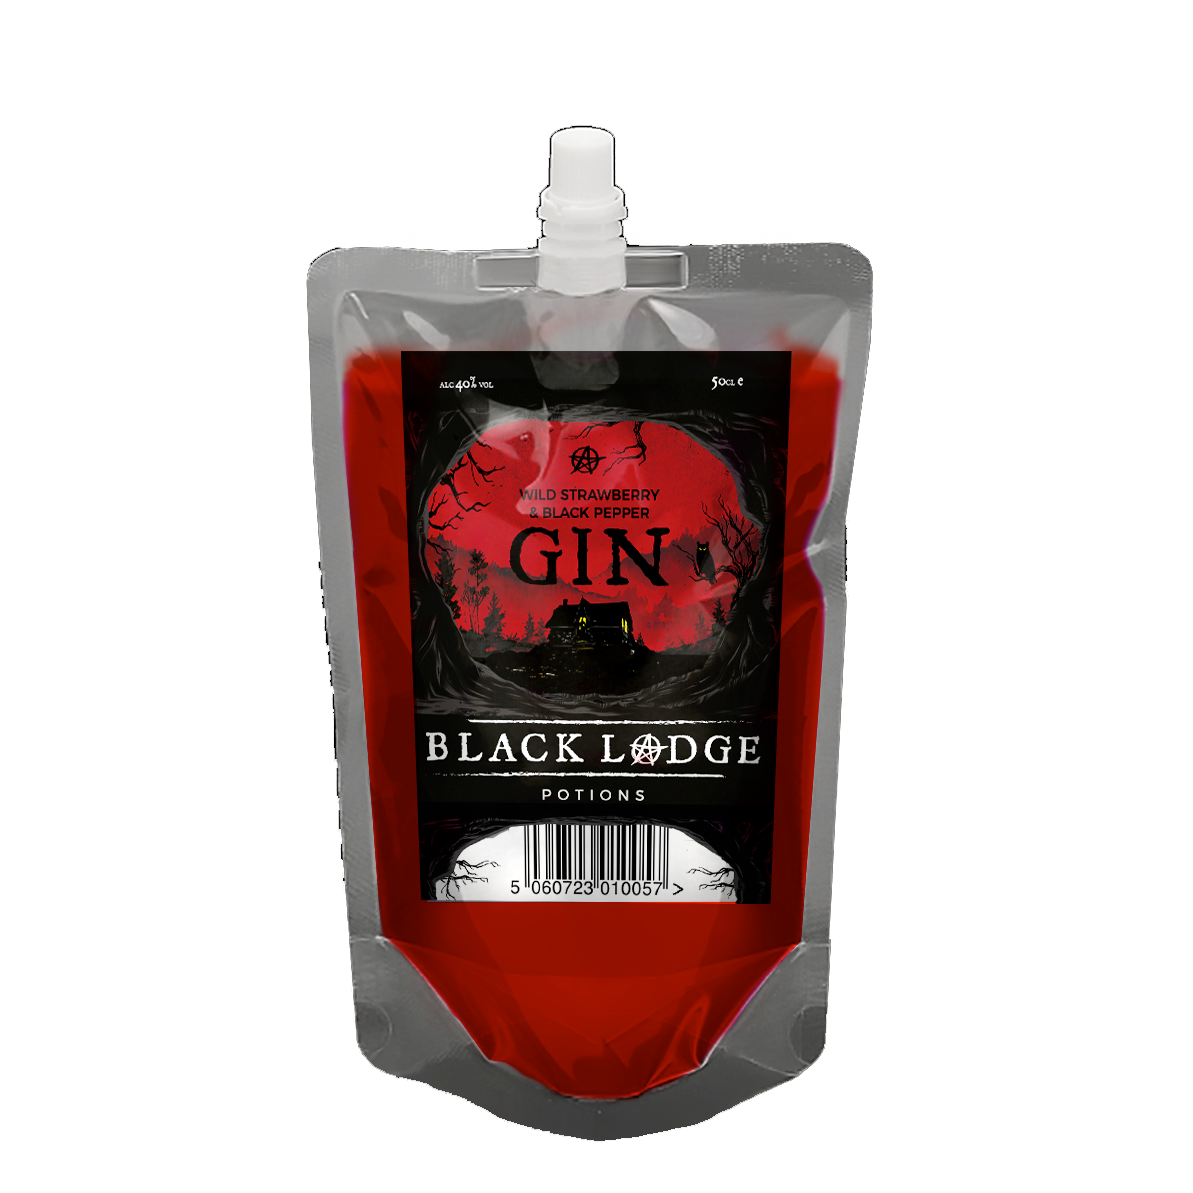 Wild Strawberry & Black Pepper Gin Pouch - Black Lodge Potions